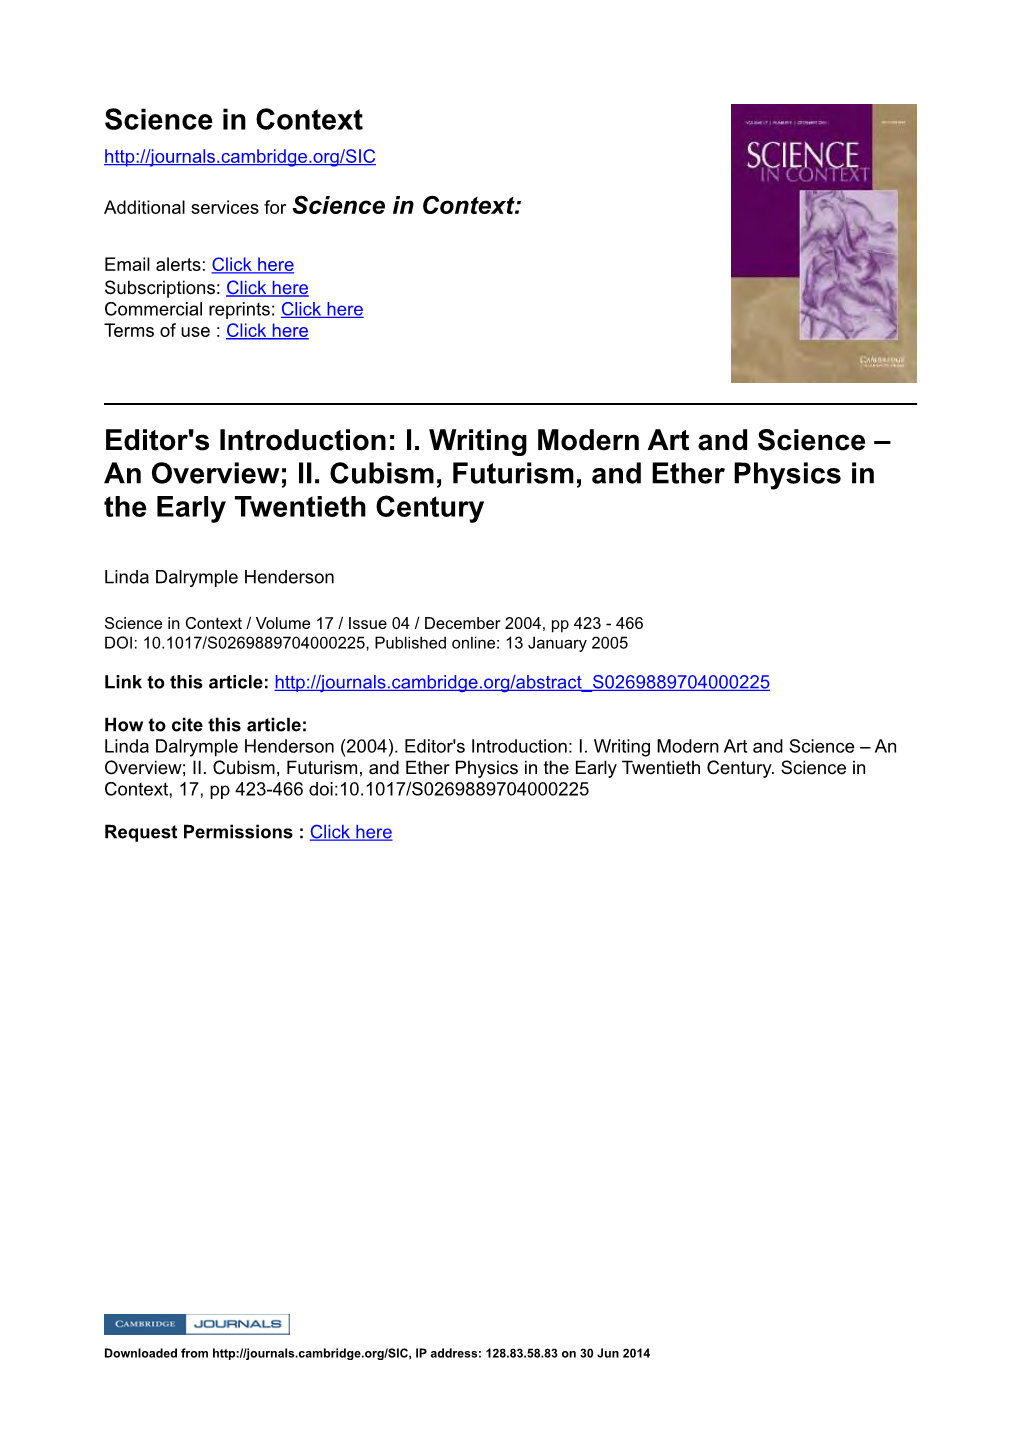 Editor's Introduction: I. Writing Modern Art and Science &#8211; an Overview; II. Cubism, Futurism, and Ether Physics In